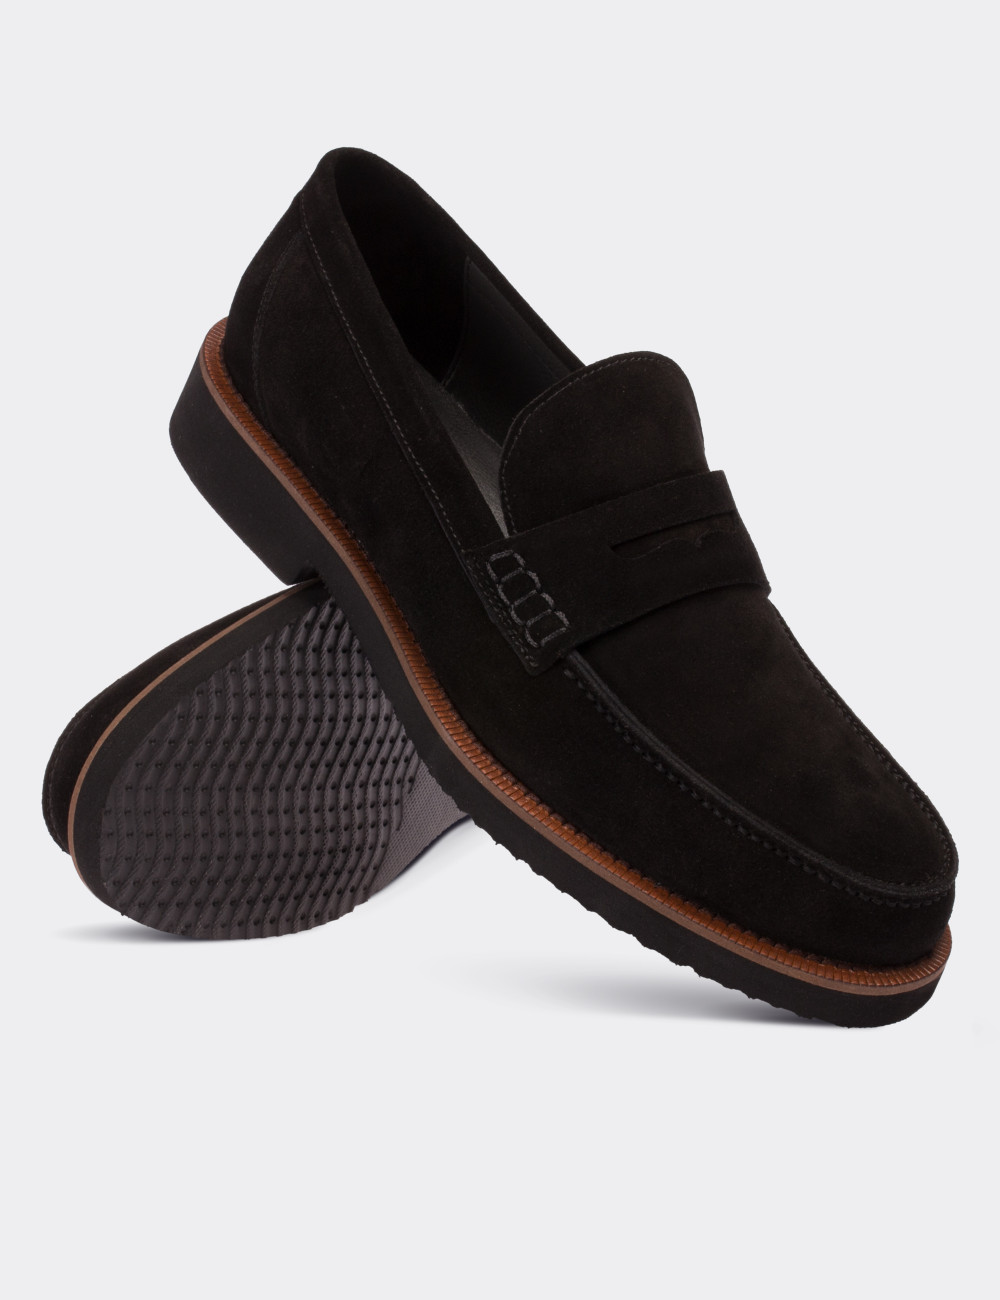 Black Suede Leather Loafers & Moccasins Shoes - 01538MSYHE09